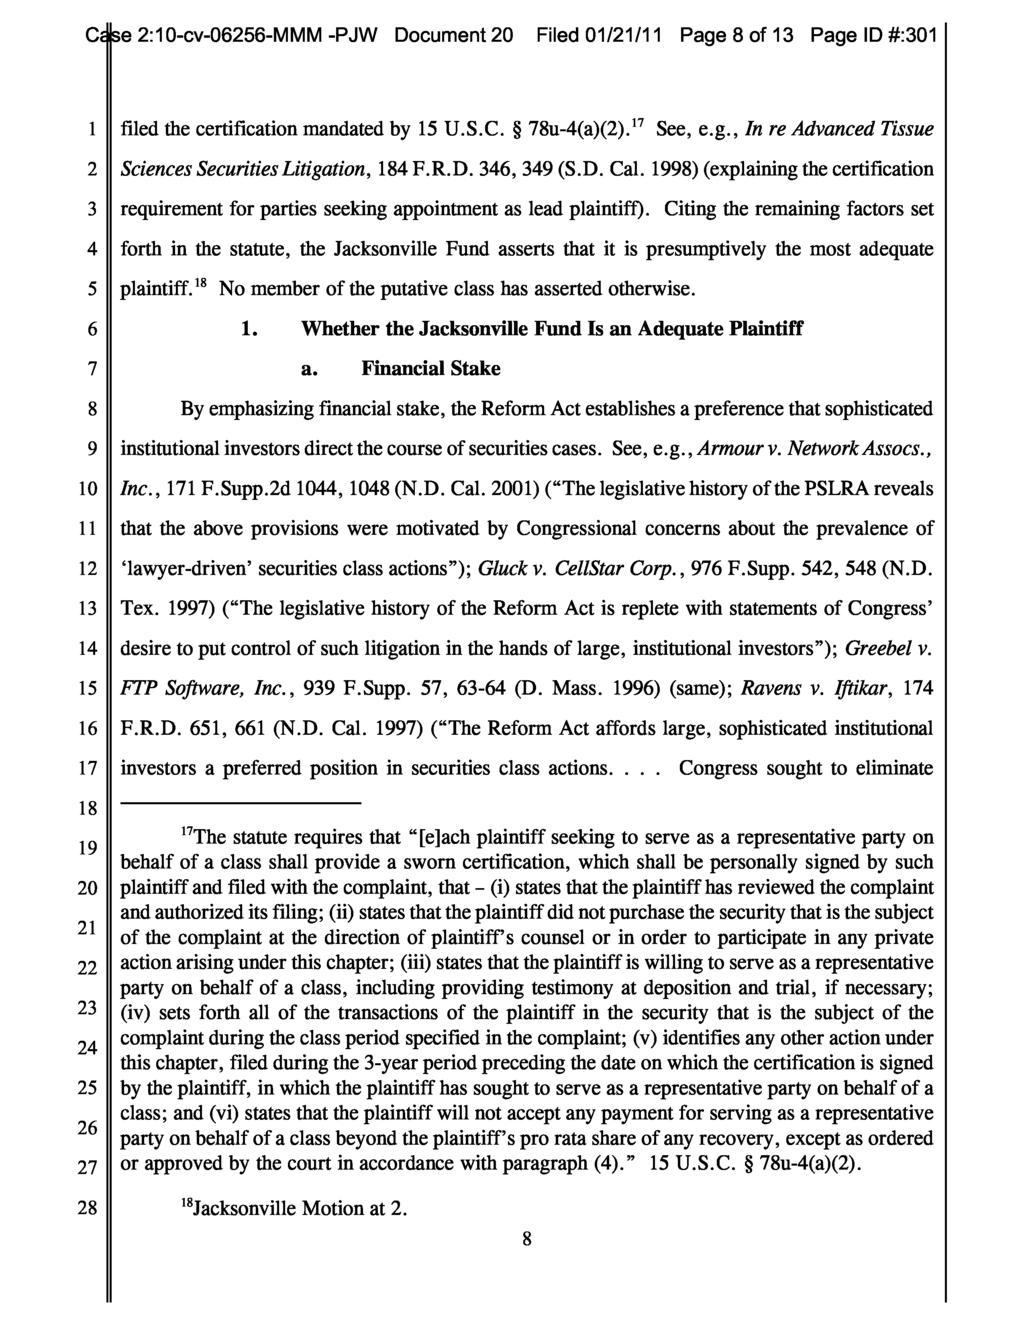 Case 2:10-cv-06256-MMM -PJW Document 20 Filed 01/21/11 Page 8 of 13 Page ID #:301 1 filed the certification mandated by 15 U.S.C. 78u-4(a)(2). 17 See, e.g., In re Advanced Tissue 2 Sciences Securities Litigation, 184 F.